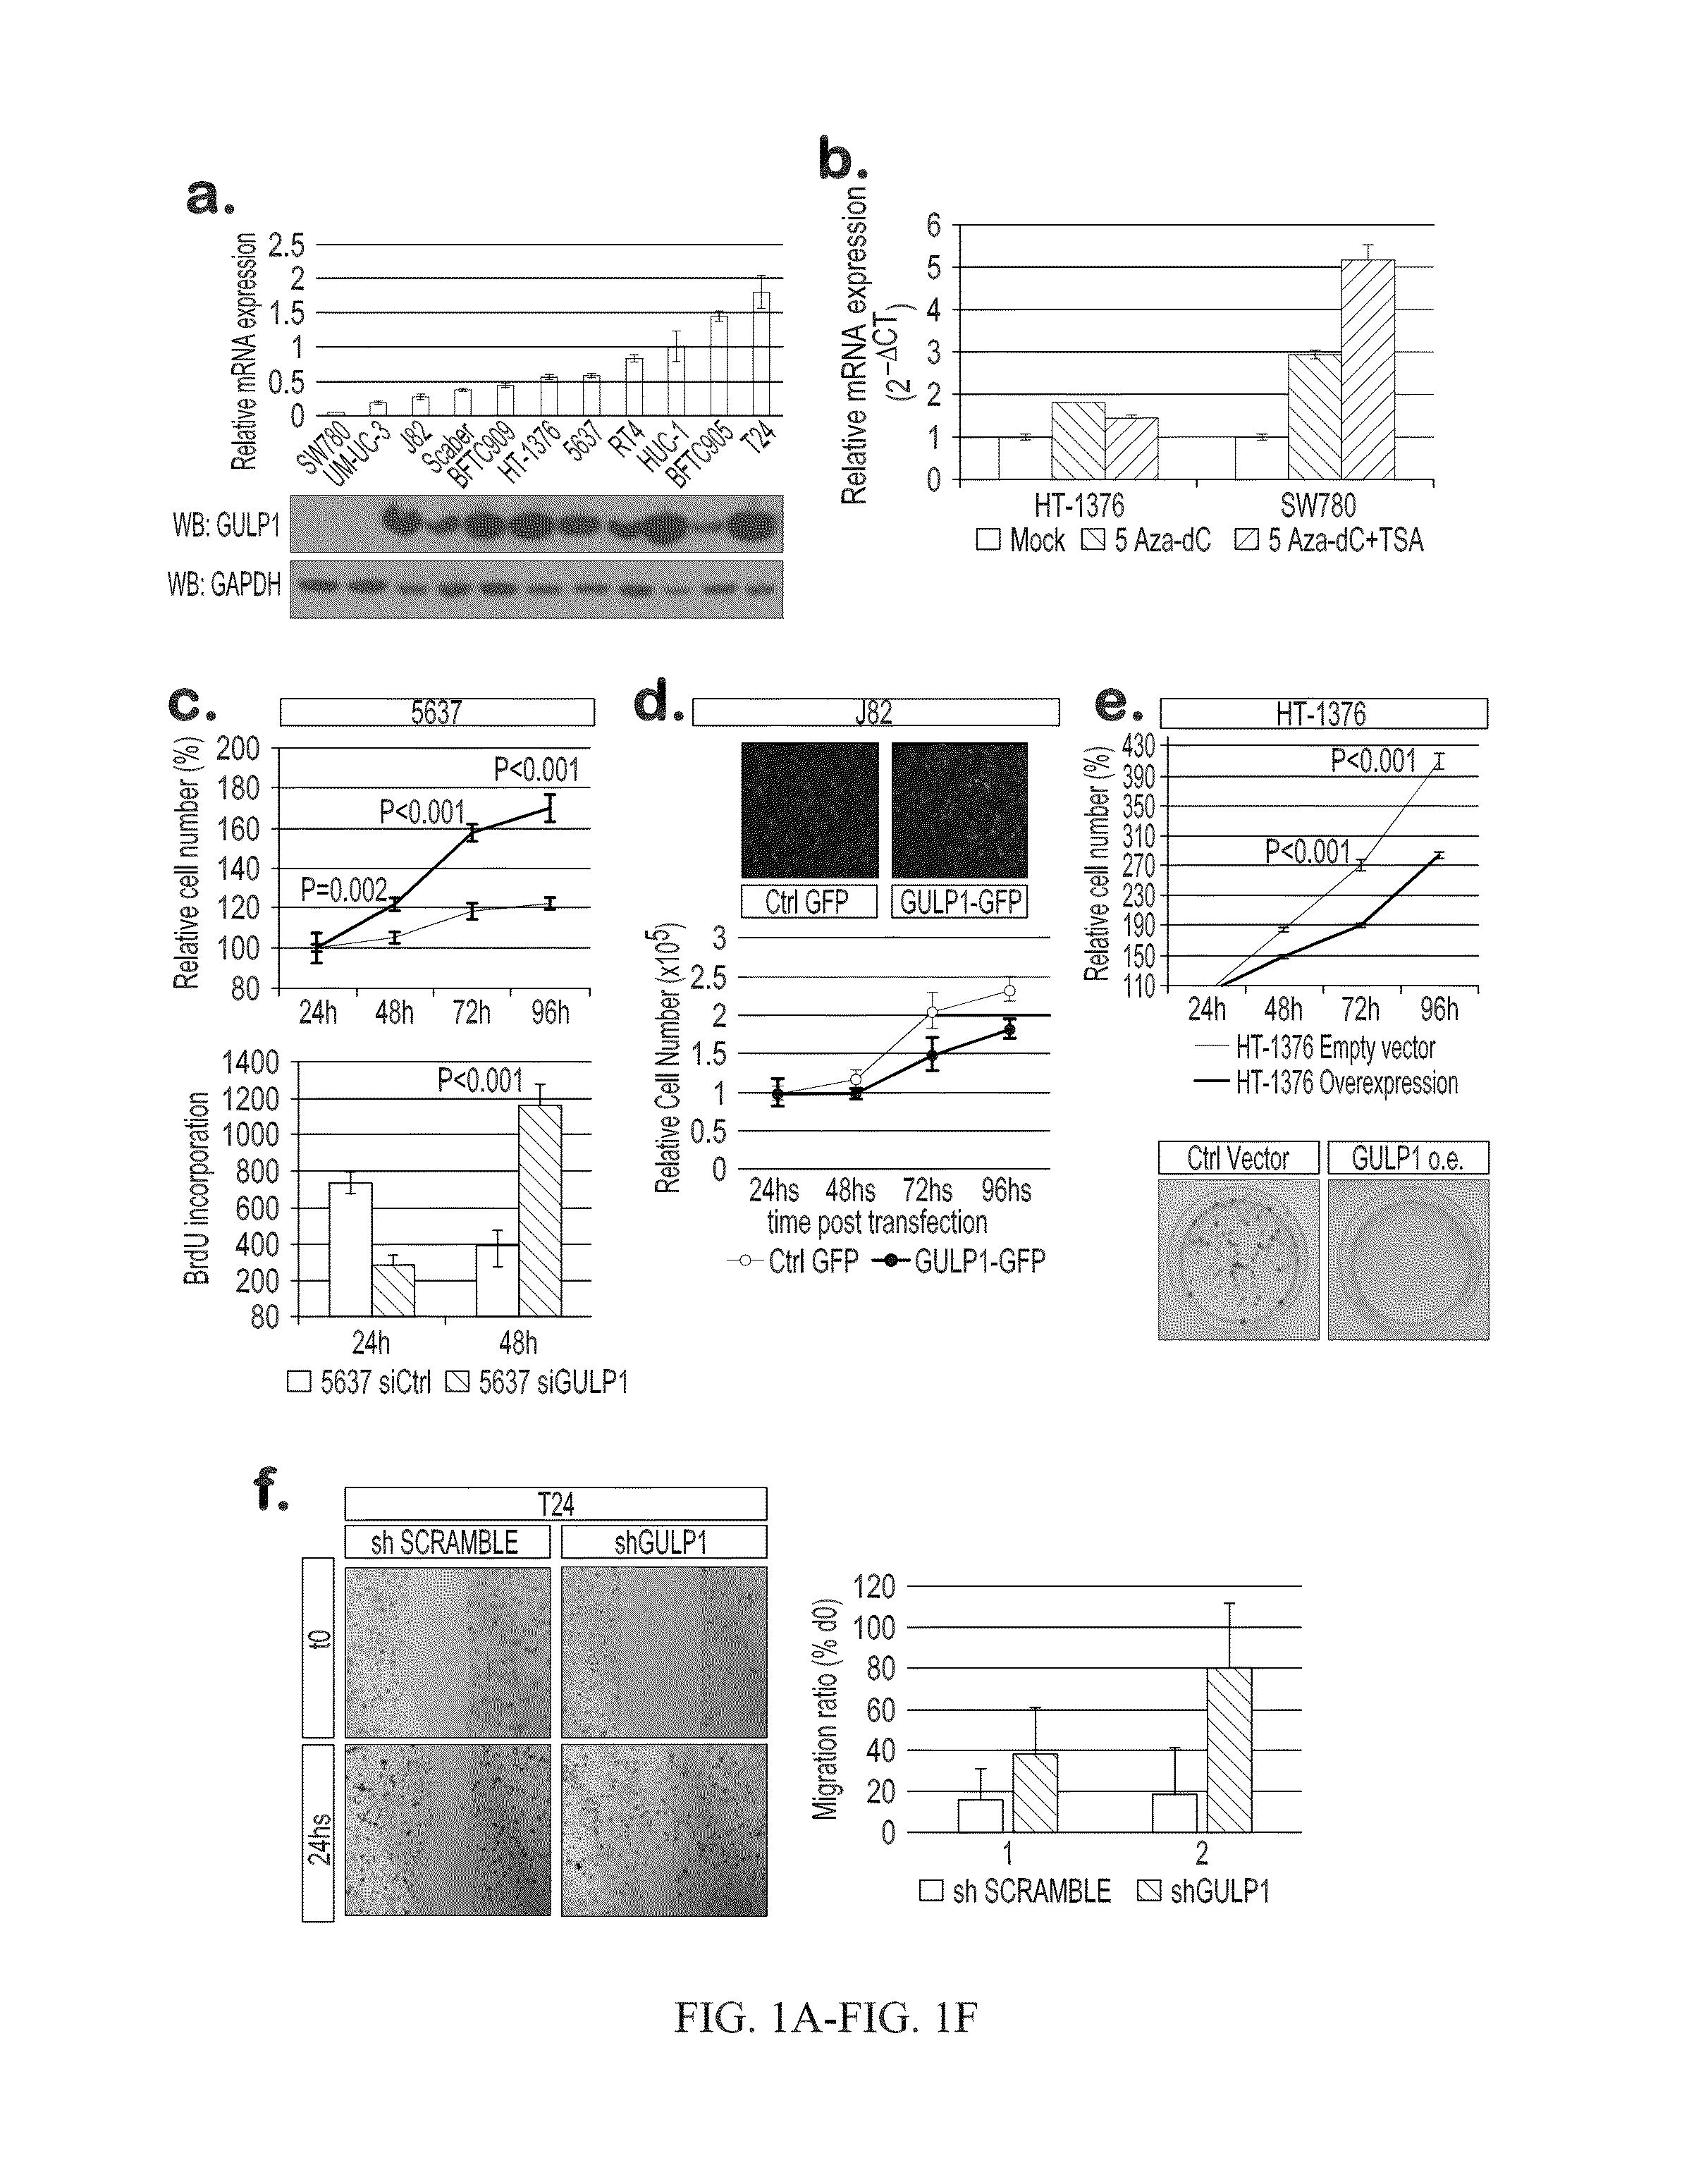 Urothelial cancer and methods of detection and targeted therapy